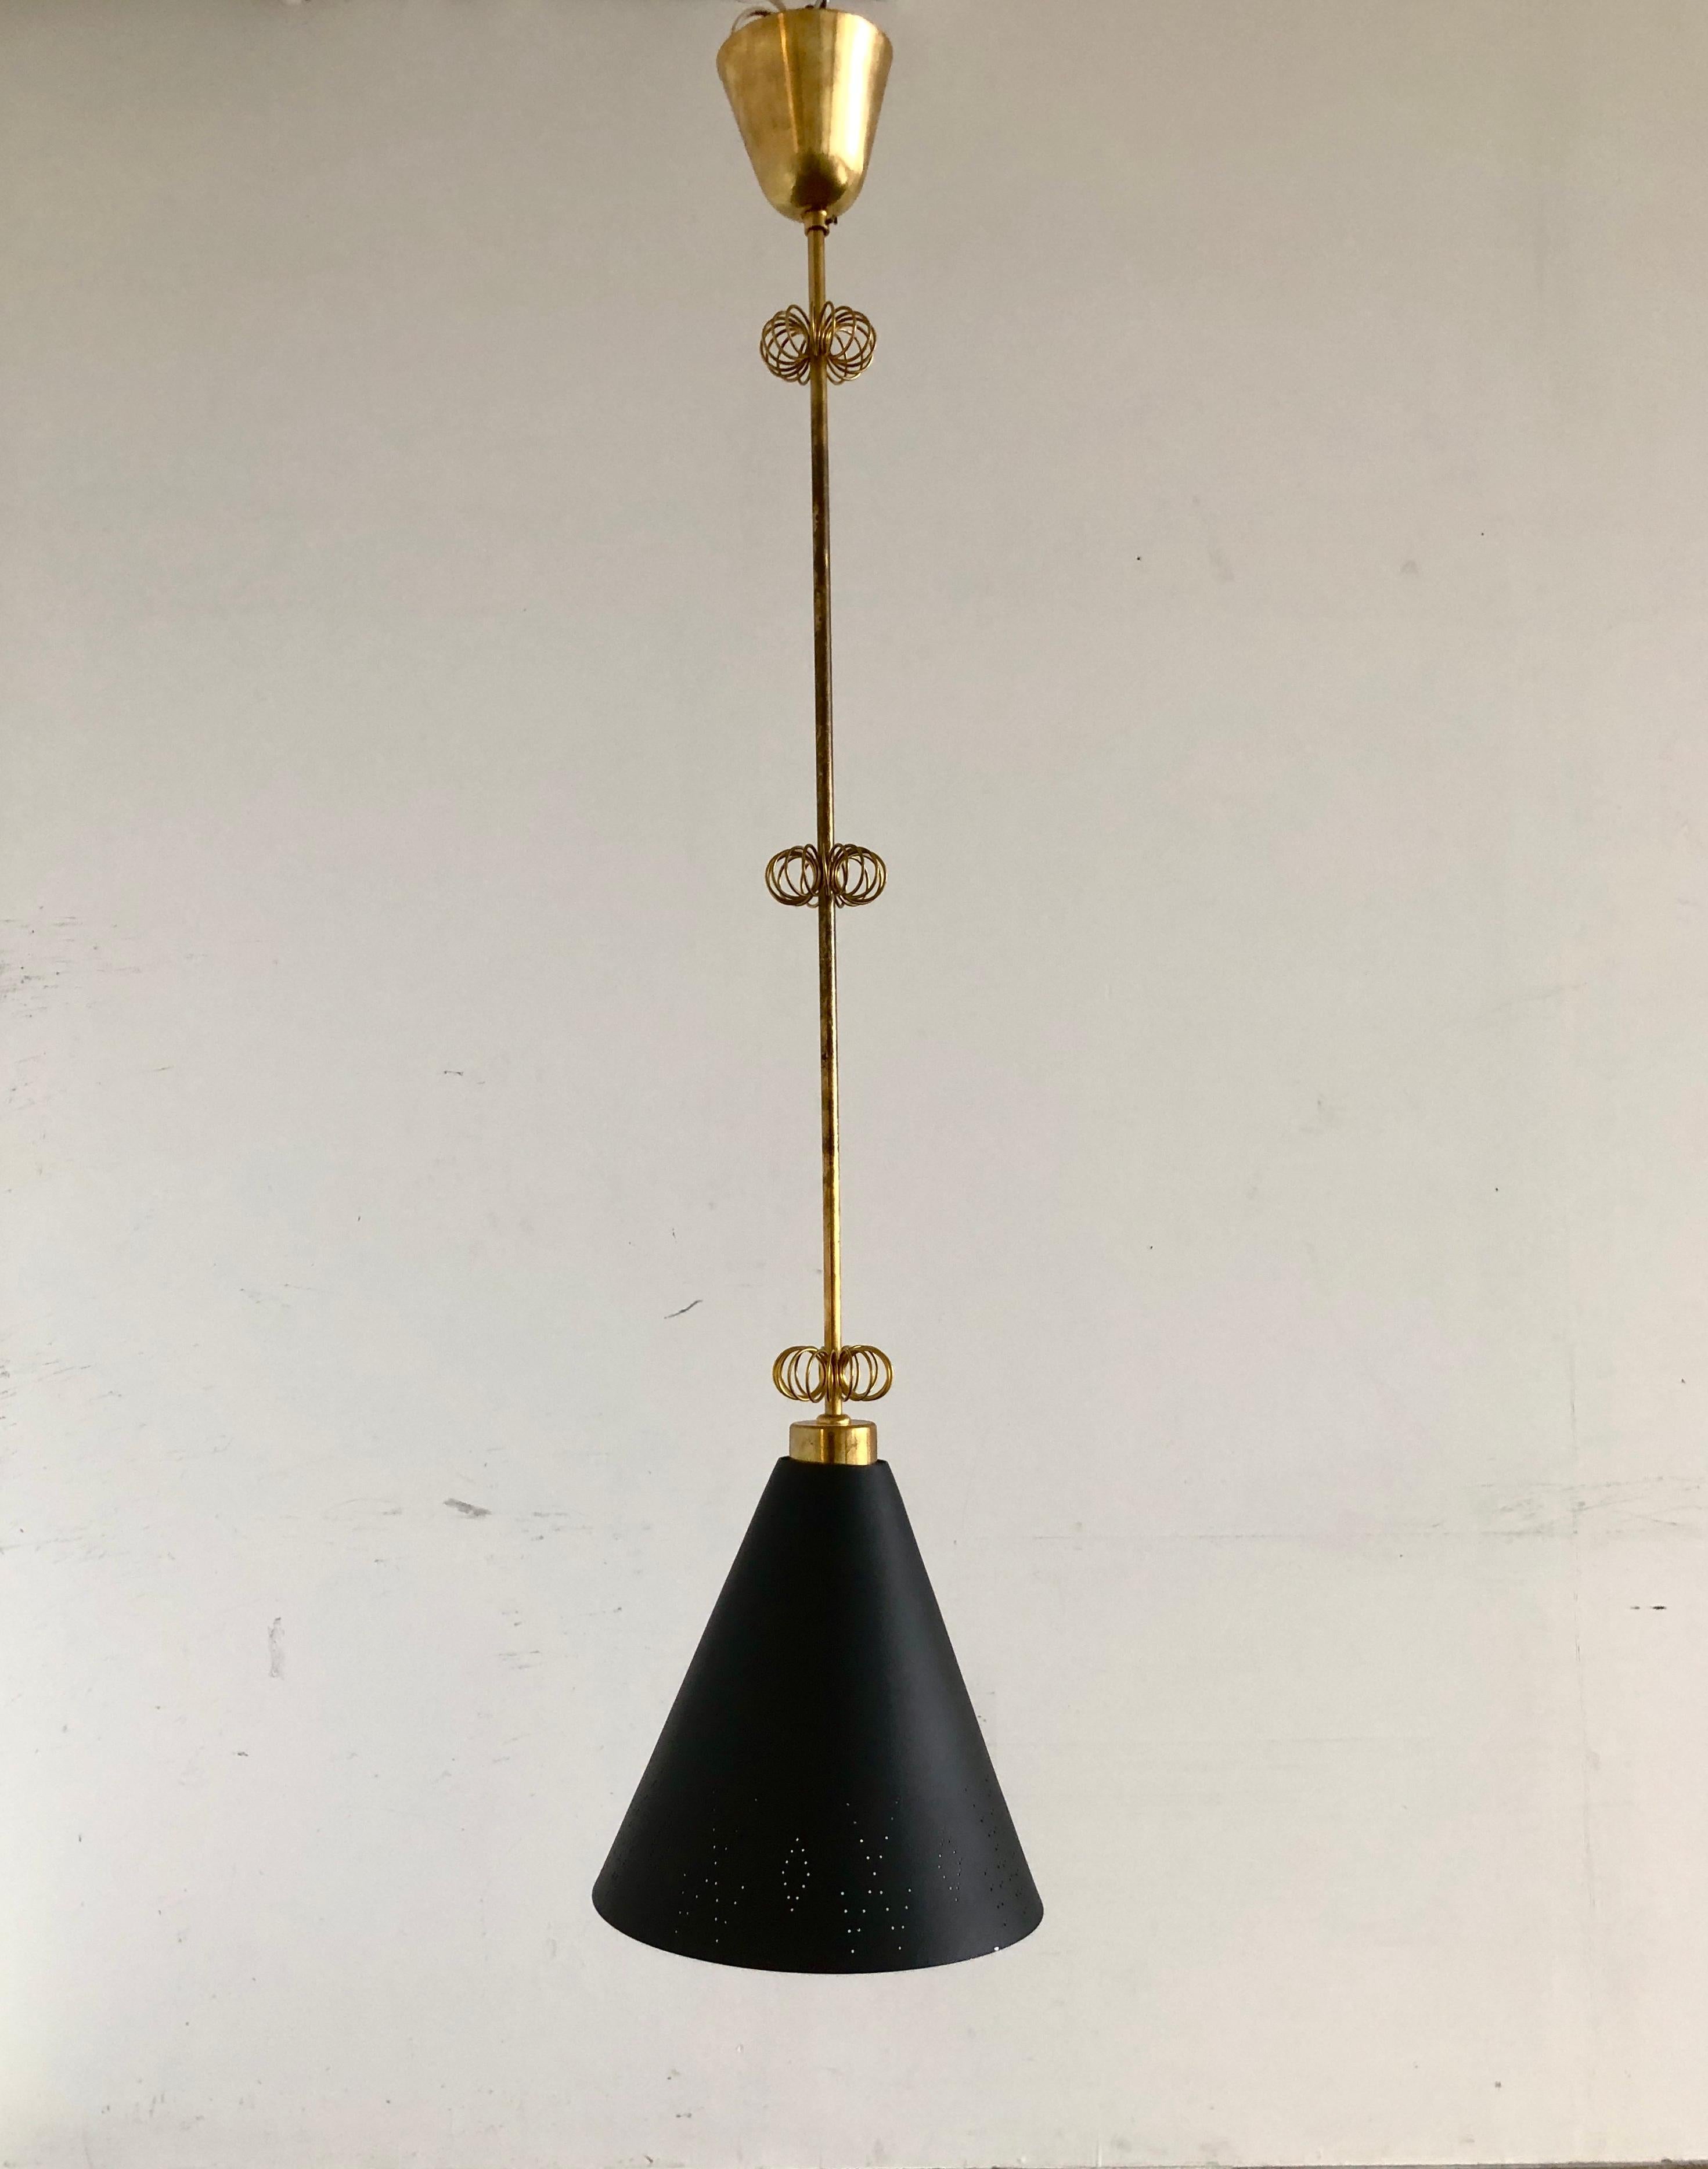 A Pendant designed by Paavo Tynell, produced by Idman Oy, Finland, circa 1950.
Perforated metal shade, polished brass stem with brass wire decorations.
Diameter 10